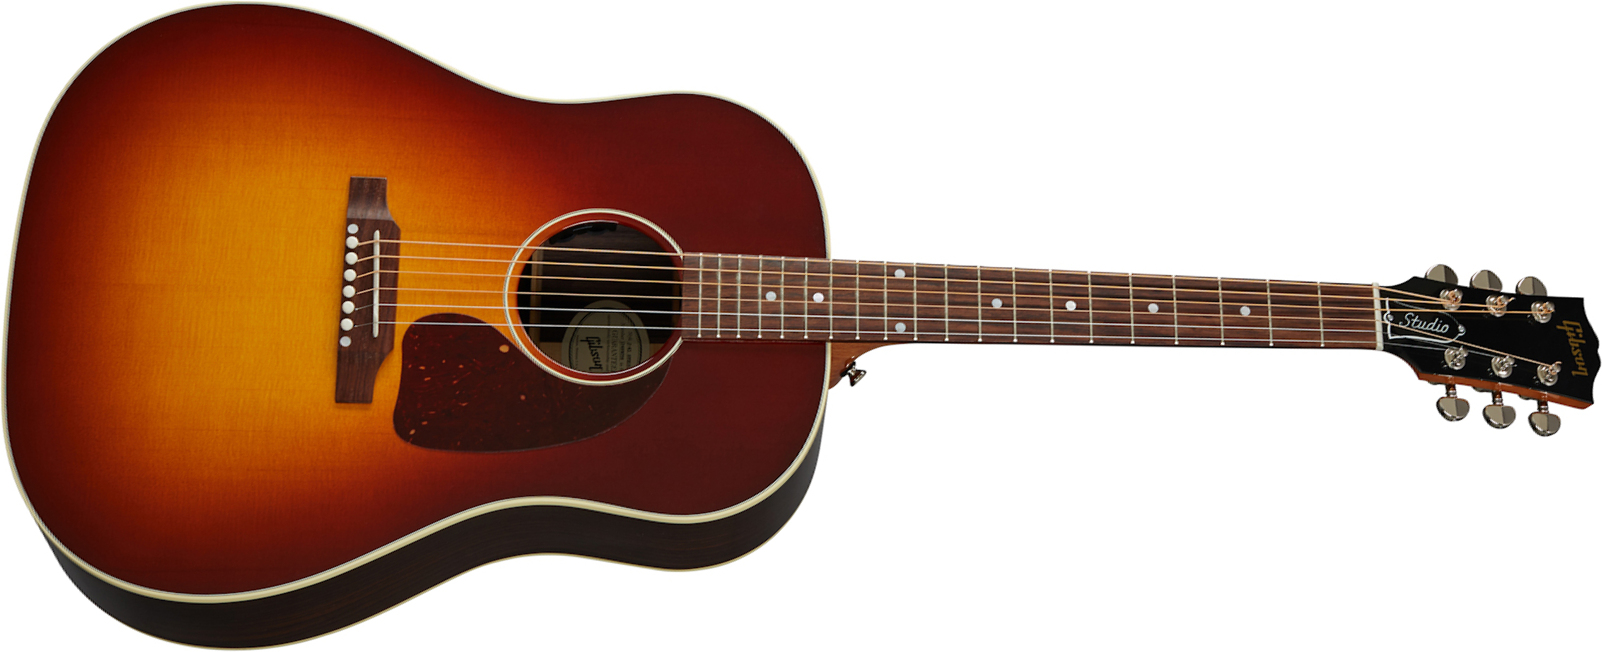 Gibson J-45 Studio Rosewood Modern 2020 Dreadnought Epicea Palissandre Rw - Rosewood Burst - Electro acoustic guitar - Main picture